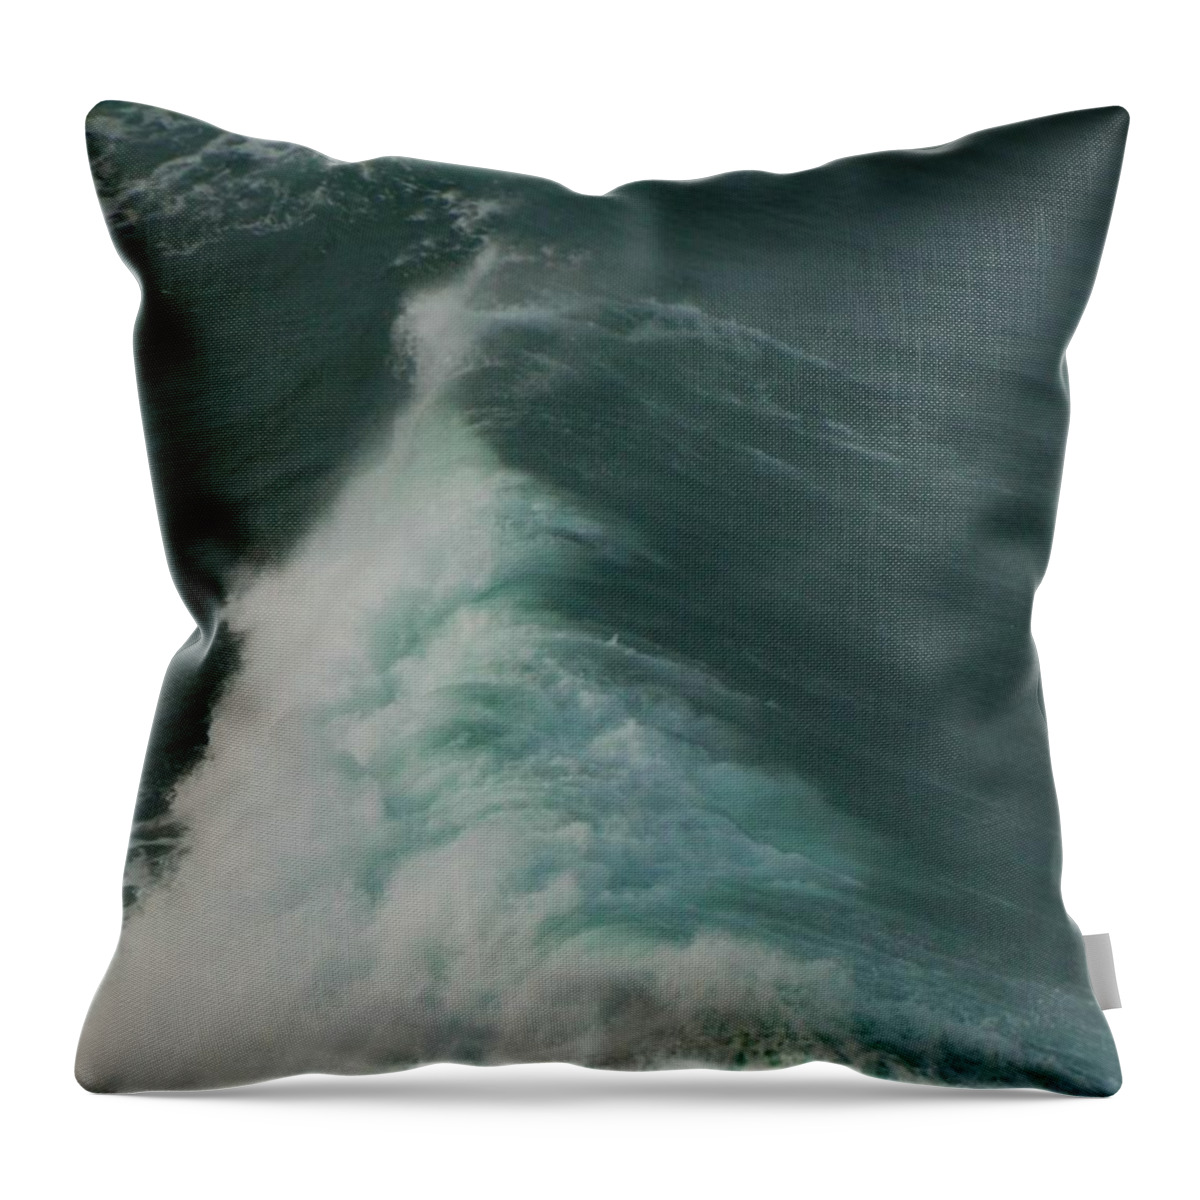 Waves Throw Pillow featuring the photograph Wave by Gallery Of Hope 